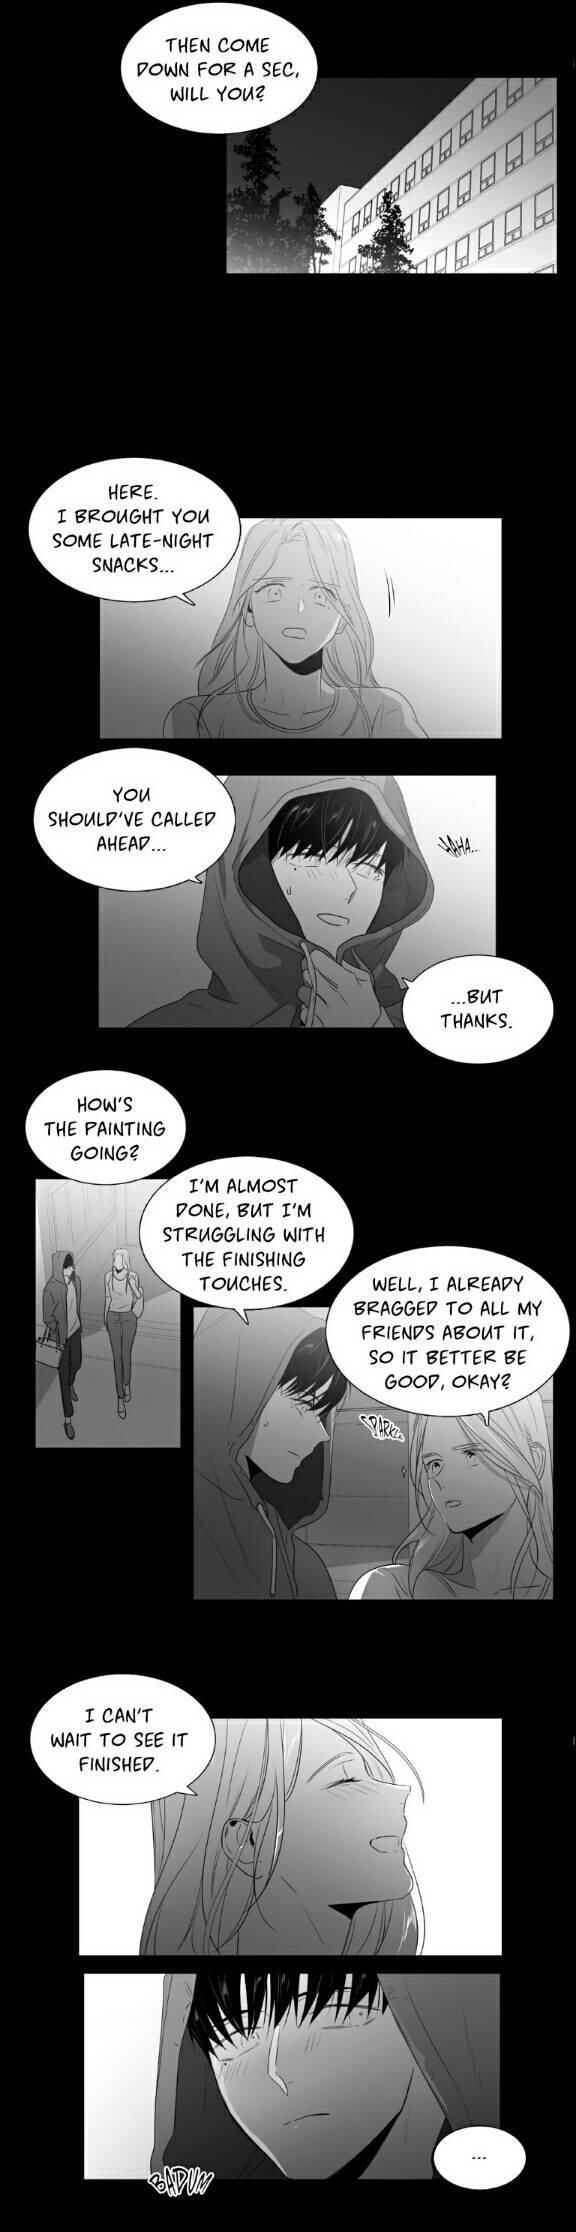 Lover Boy (Lezhin) Chapter 048.5 page 3